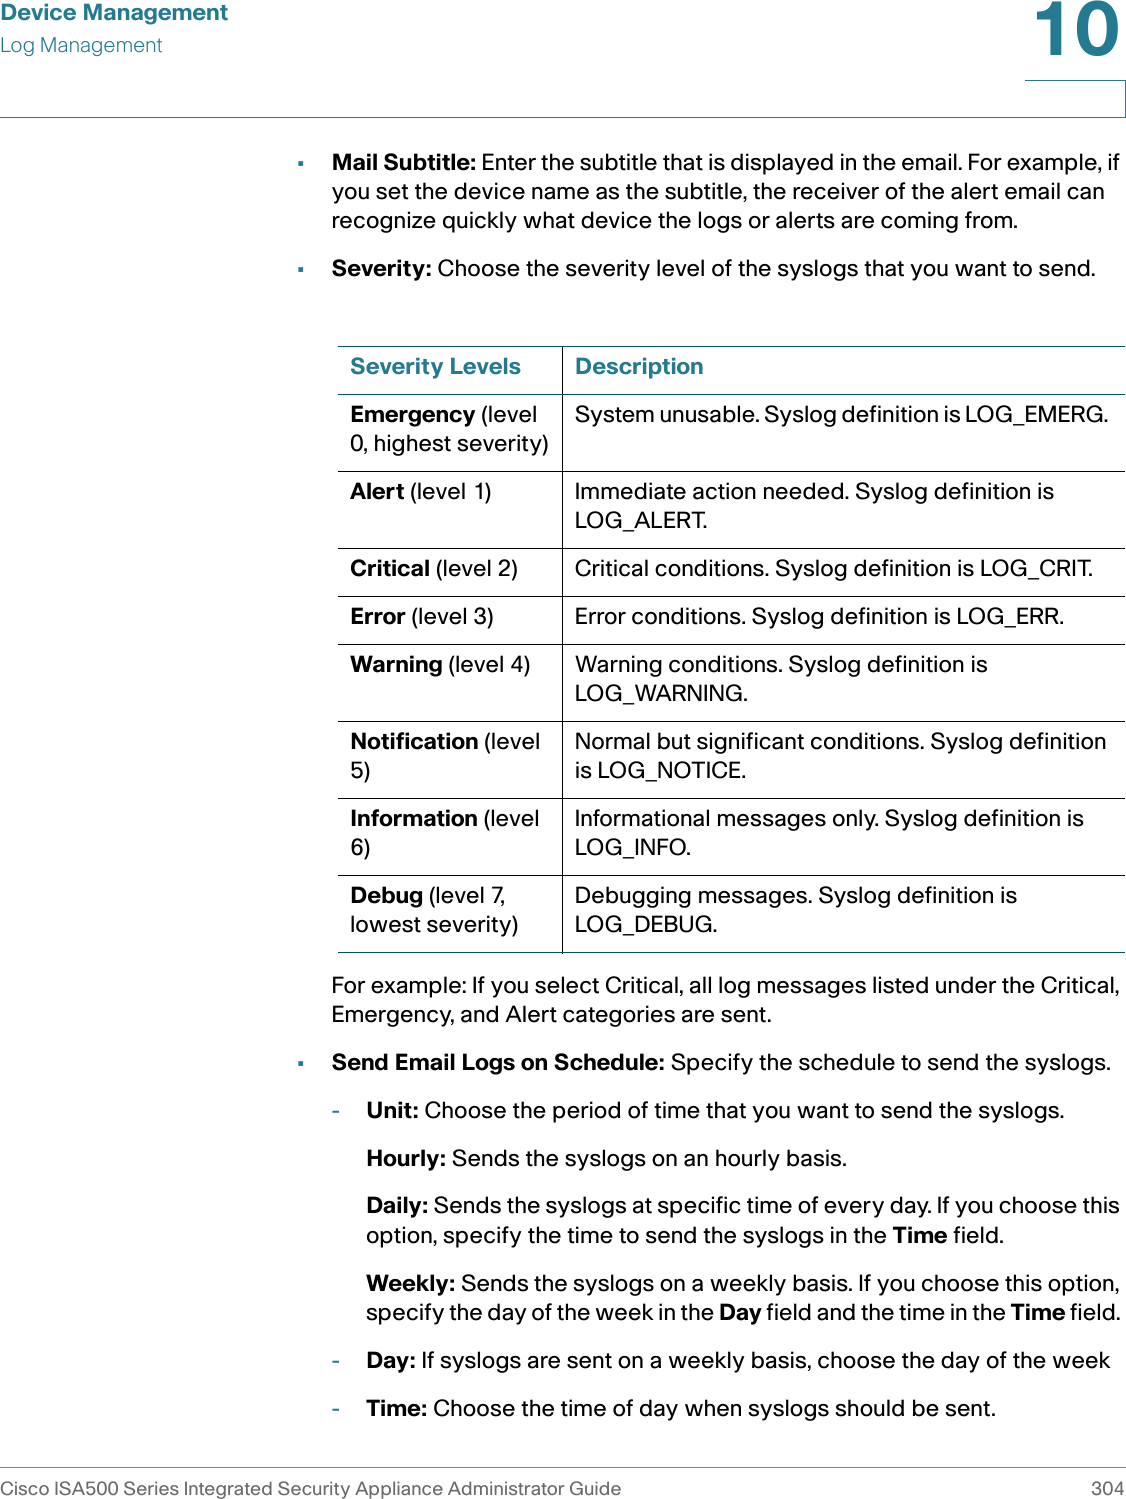 Device ManagementLog ManagementCisco ISA500 Series Integrated Security Appliance Administrator Guide 30410 •Mail Subtitle: Enter the subtitle that is displayed in the email. For example, if you set the device name as the subtitle, the receiver of the alert email can recognize quickly what device the logs or alerts are coming from. •Severity: Choose the severity level of the syslogs that you want to send. For example: If you select Critical, all log messages listed under the Critical, Emergency, and Alert categories are sent.•Send Email Logs on Schedule: Specify the schedule to send the syslogs.-Unit: Choose the period of time that you want to send the syslogs. Hourly: Sends the syslogs on an hourly basis.Daily: Sends the syslogs at specific time of every day. If you choose this option, specify the time to send the syslogs in the Time field. Weekly: Sends the syslogs on a weekly basis. If you choose this option, specify the day of the week in the Day field and the time in the Time field. -Day: If syslogs are sent on a weekly basis, choose the day of the week-Time: Choose the time of day when syslogs should be sent. Severity Levels DescriptionEmergency (level 0, highest severity)System unusable. Syslog definition is LOG_EMERG. Alert (level 1) Immediate action needed. Syslog definition is LOG_ALERT.Critical (level 2) Critical conditions. Syslog definition is LOG_CRIT.Error (level 3) Error conditions. Syslog definition is LOG_ERR.Warning (level 4) Warning conditions. Syslog definition is LOG_WARNING.Notification (level 5)Normal but significant conditions. Syslog definition is LOG_NOTICE.Information (level 6)Informational messages only. Syslog definition is LOG_INFO.Debug (level 7, lowest severity)Debugging messages. Syslog definition is LOG_DEBUG.